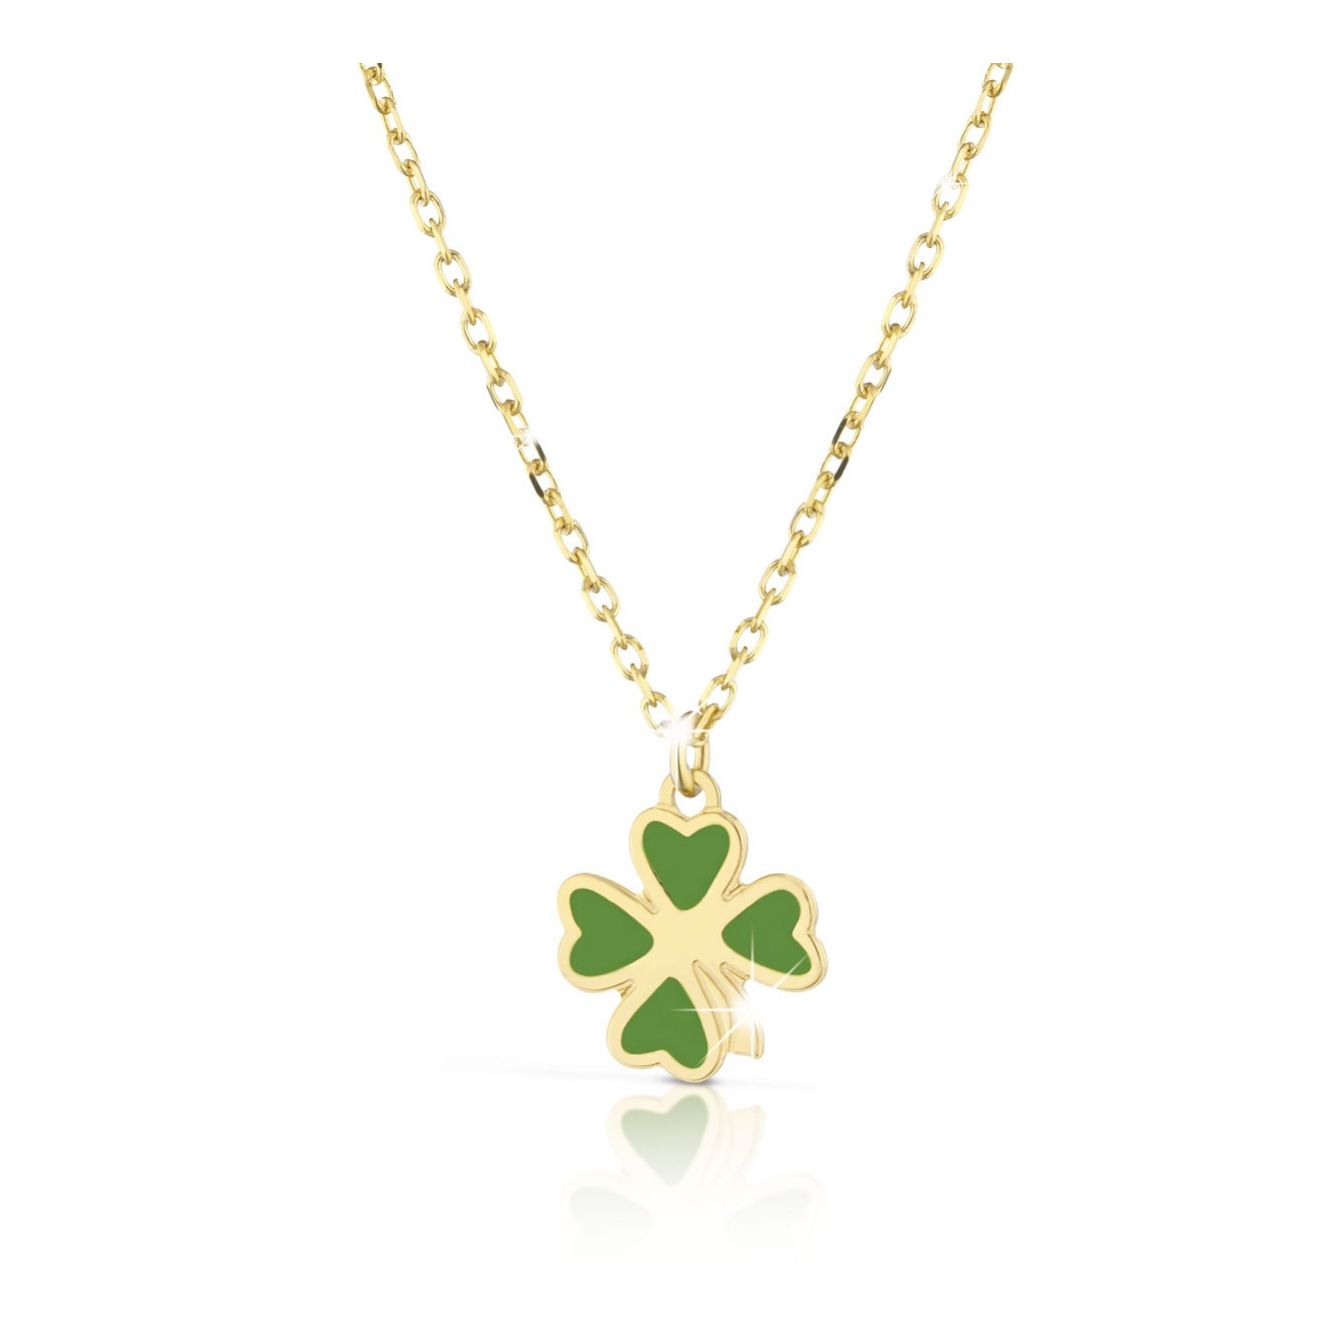 NECKLACE IN YELLOW GOLD WITH ENAMEL FOUR-LEAF COURT - PMG027